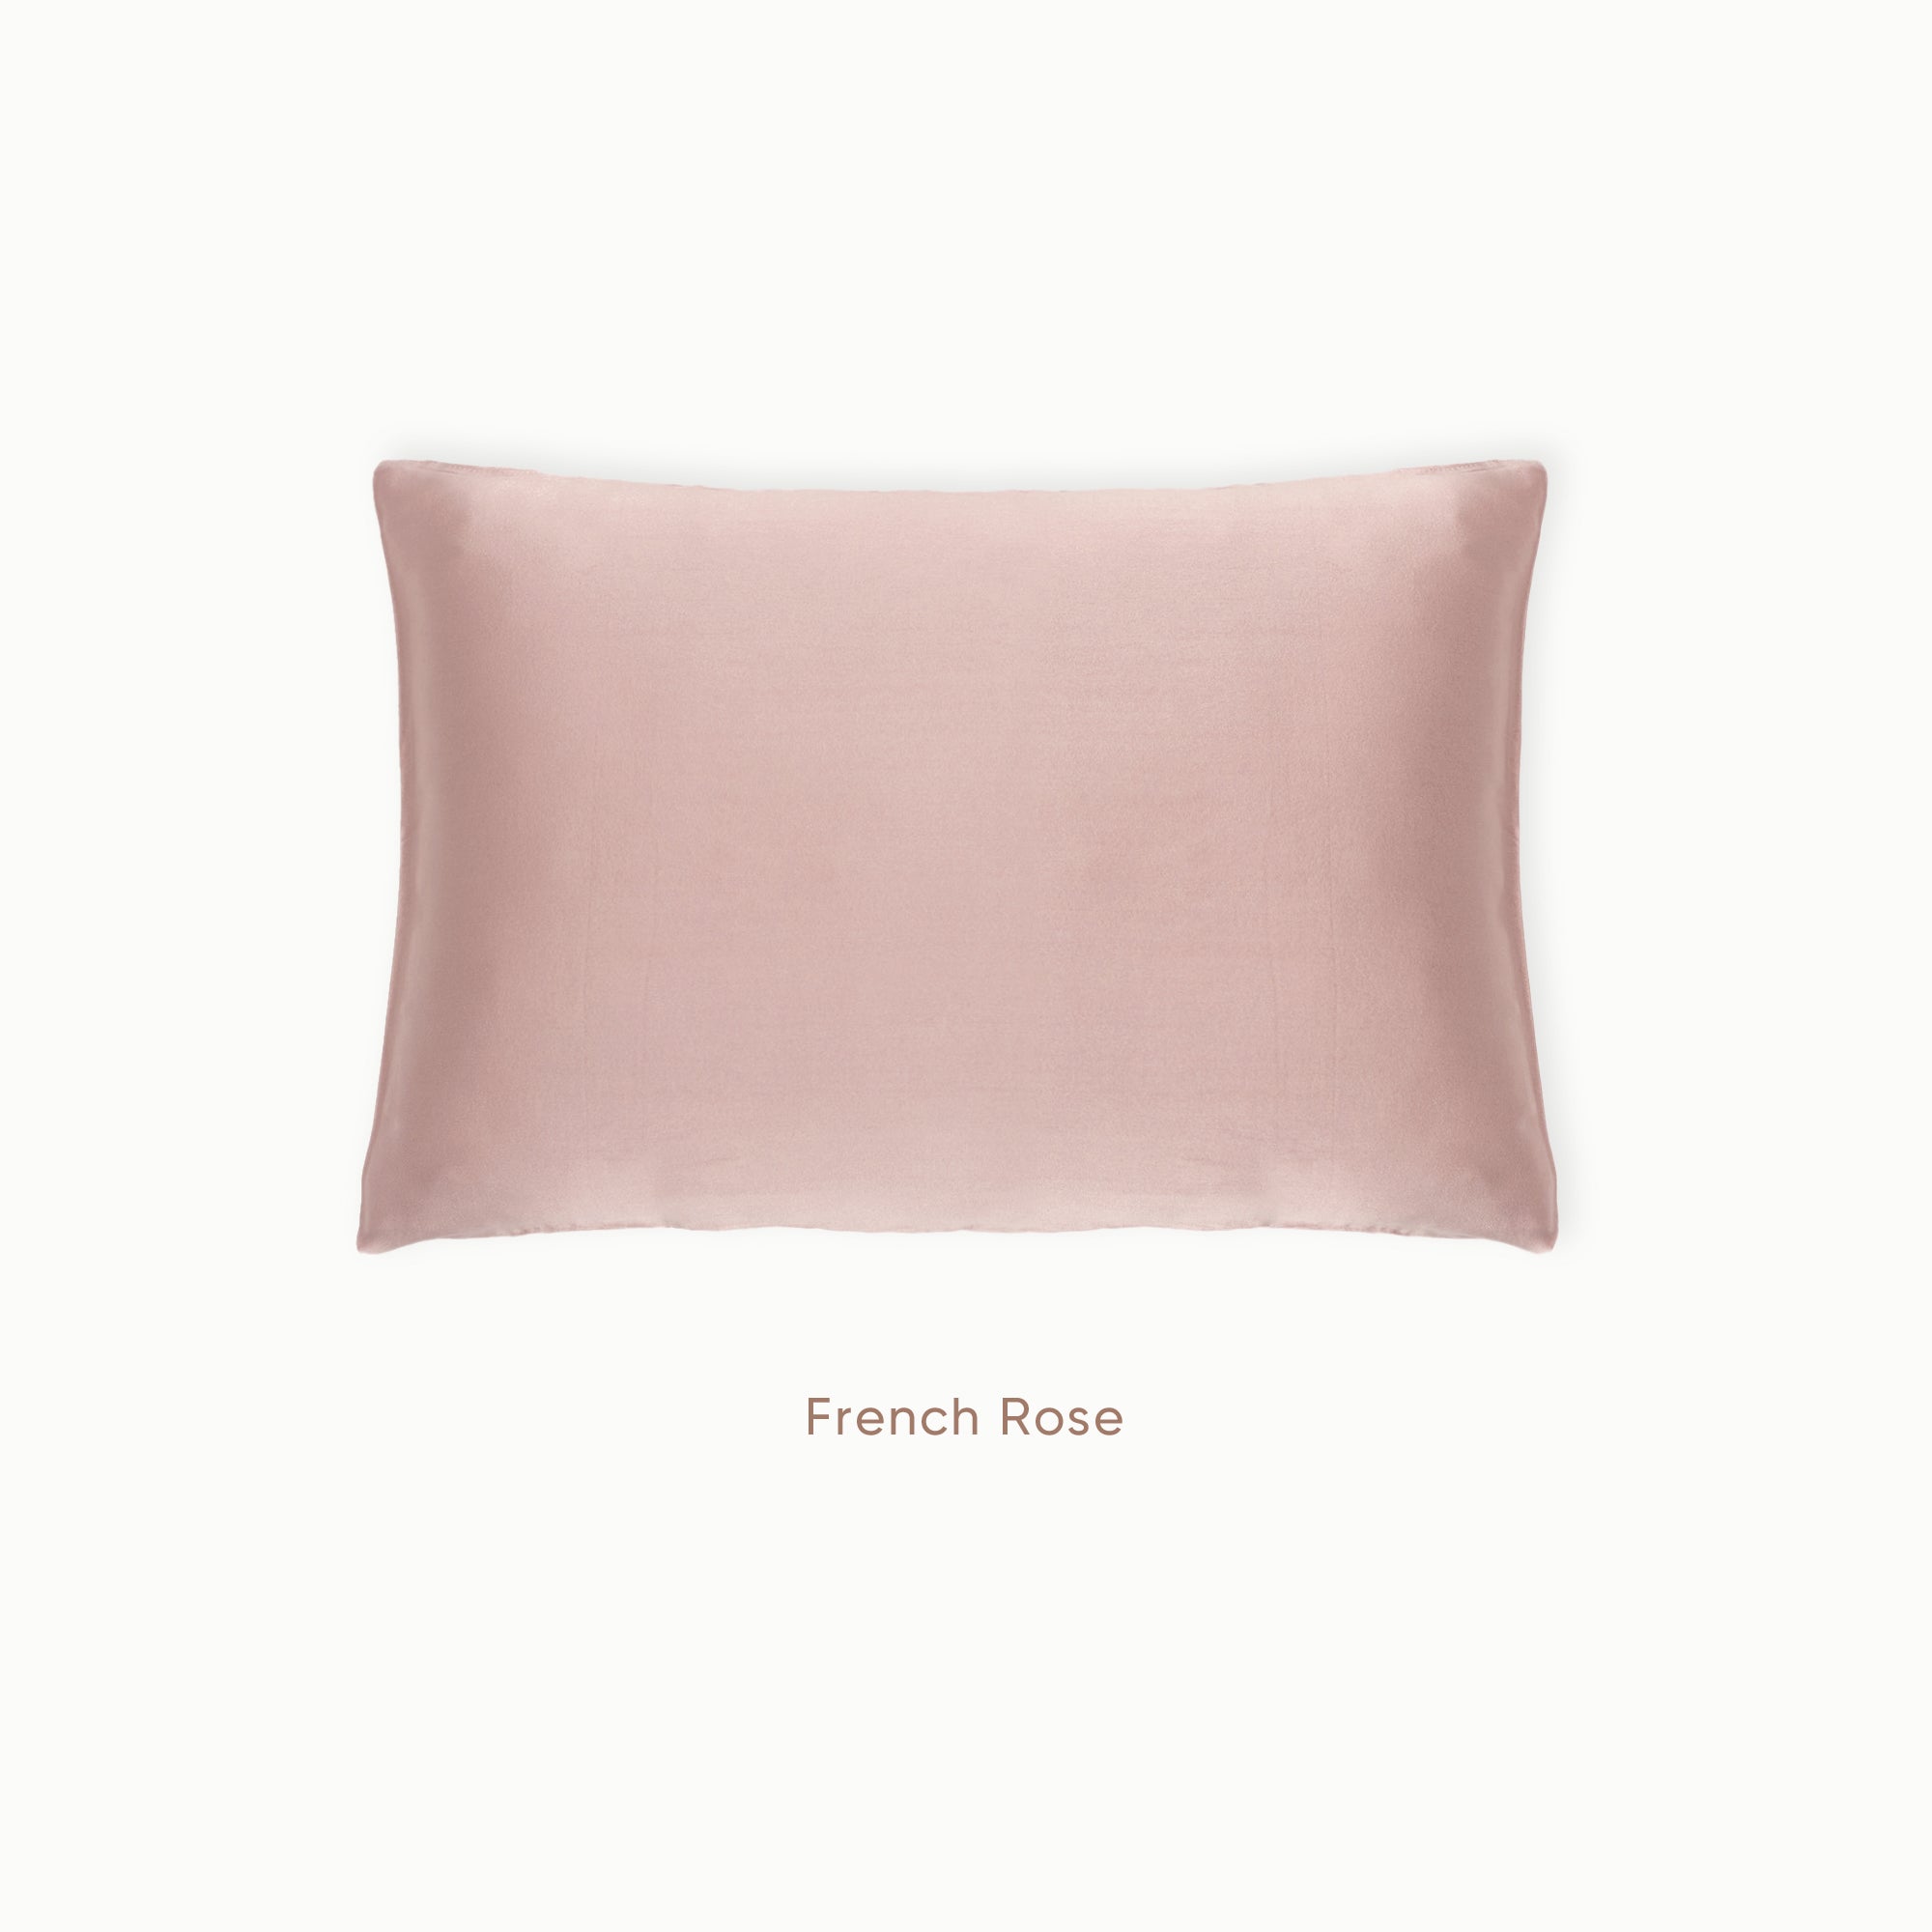 Mulberry Silk Pillowcase - French Rose